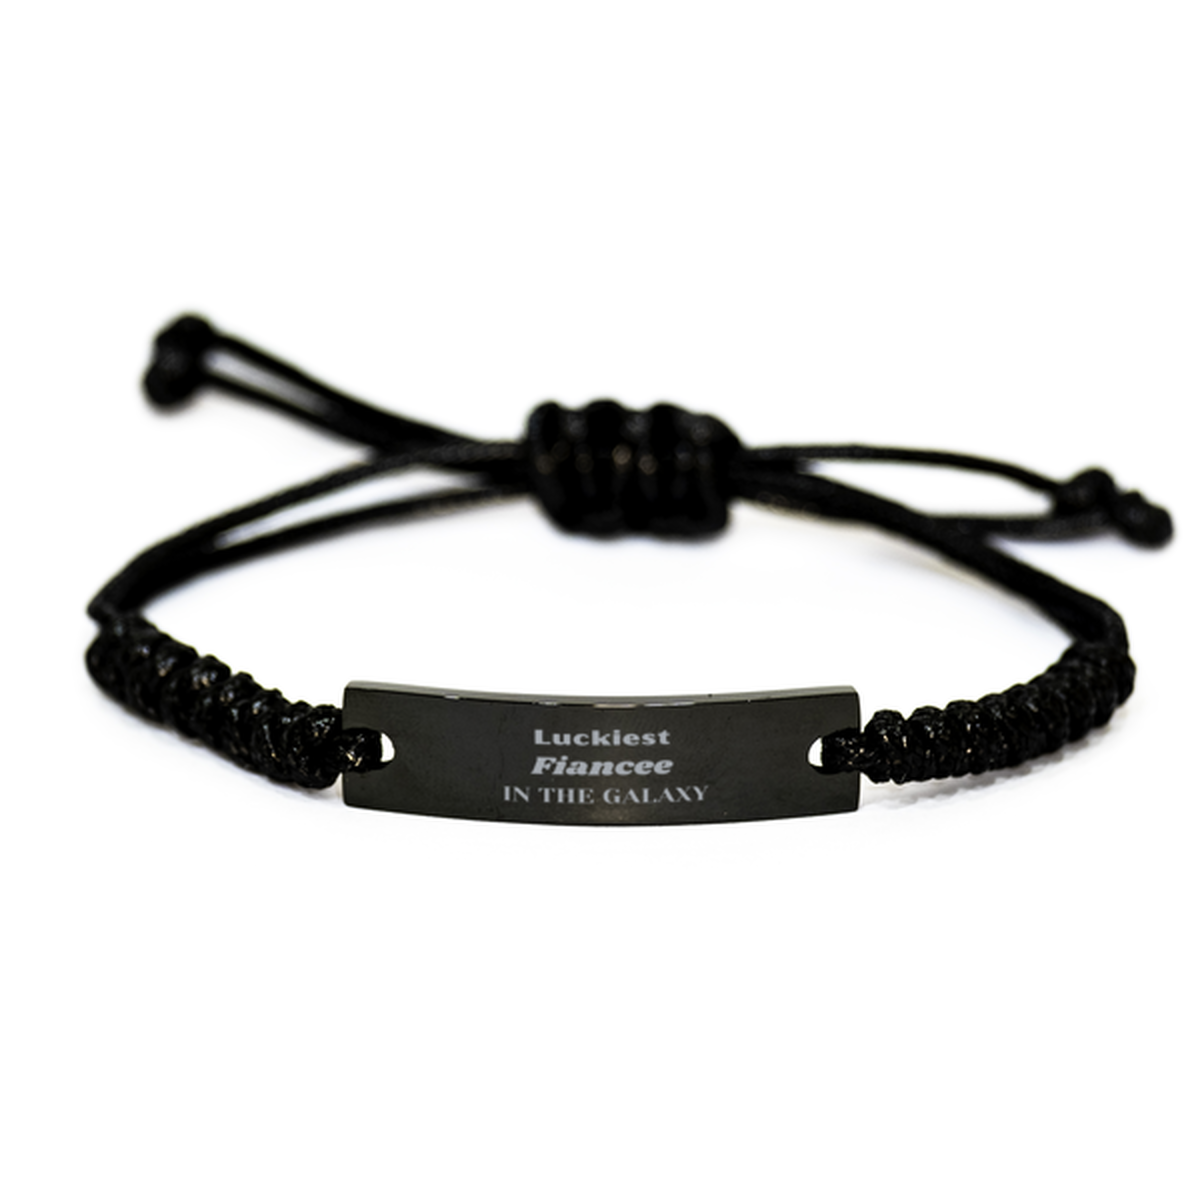 Luckiest Fiancee in the Galaxy, To My Fiancee Engraved Gifts, Christmas Fiancee Black Rope Bracelet Gifts, X-mas Birthday Unique Gifts For Fiancee Men Women